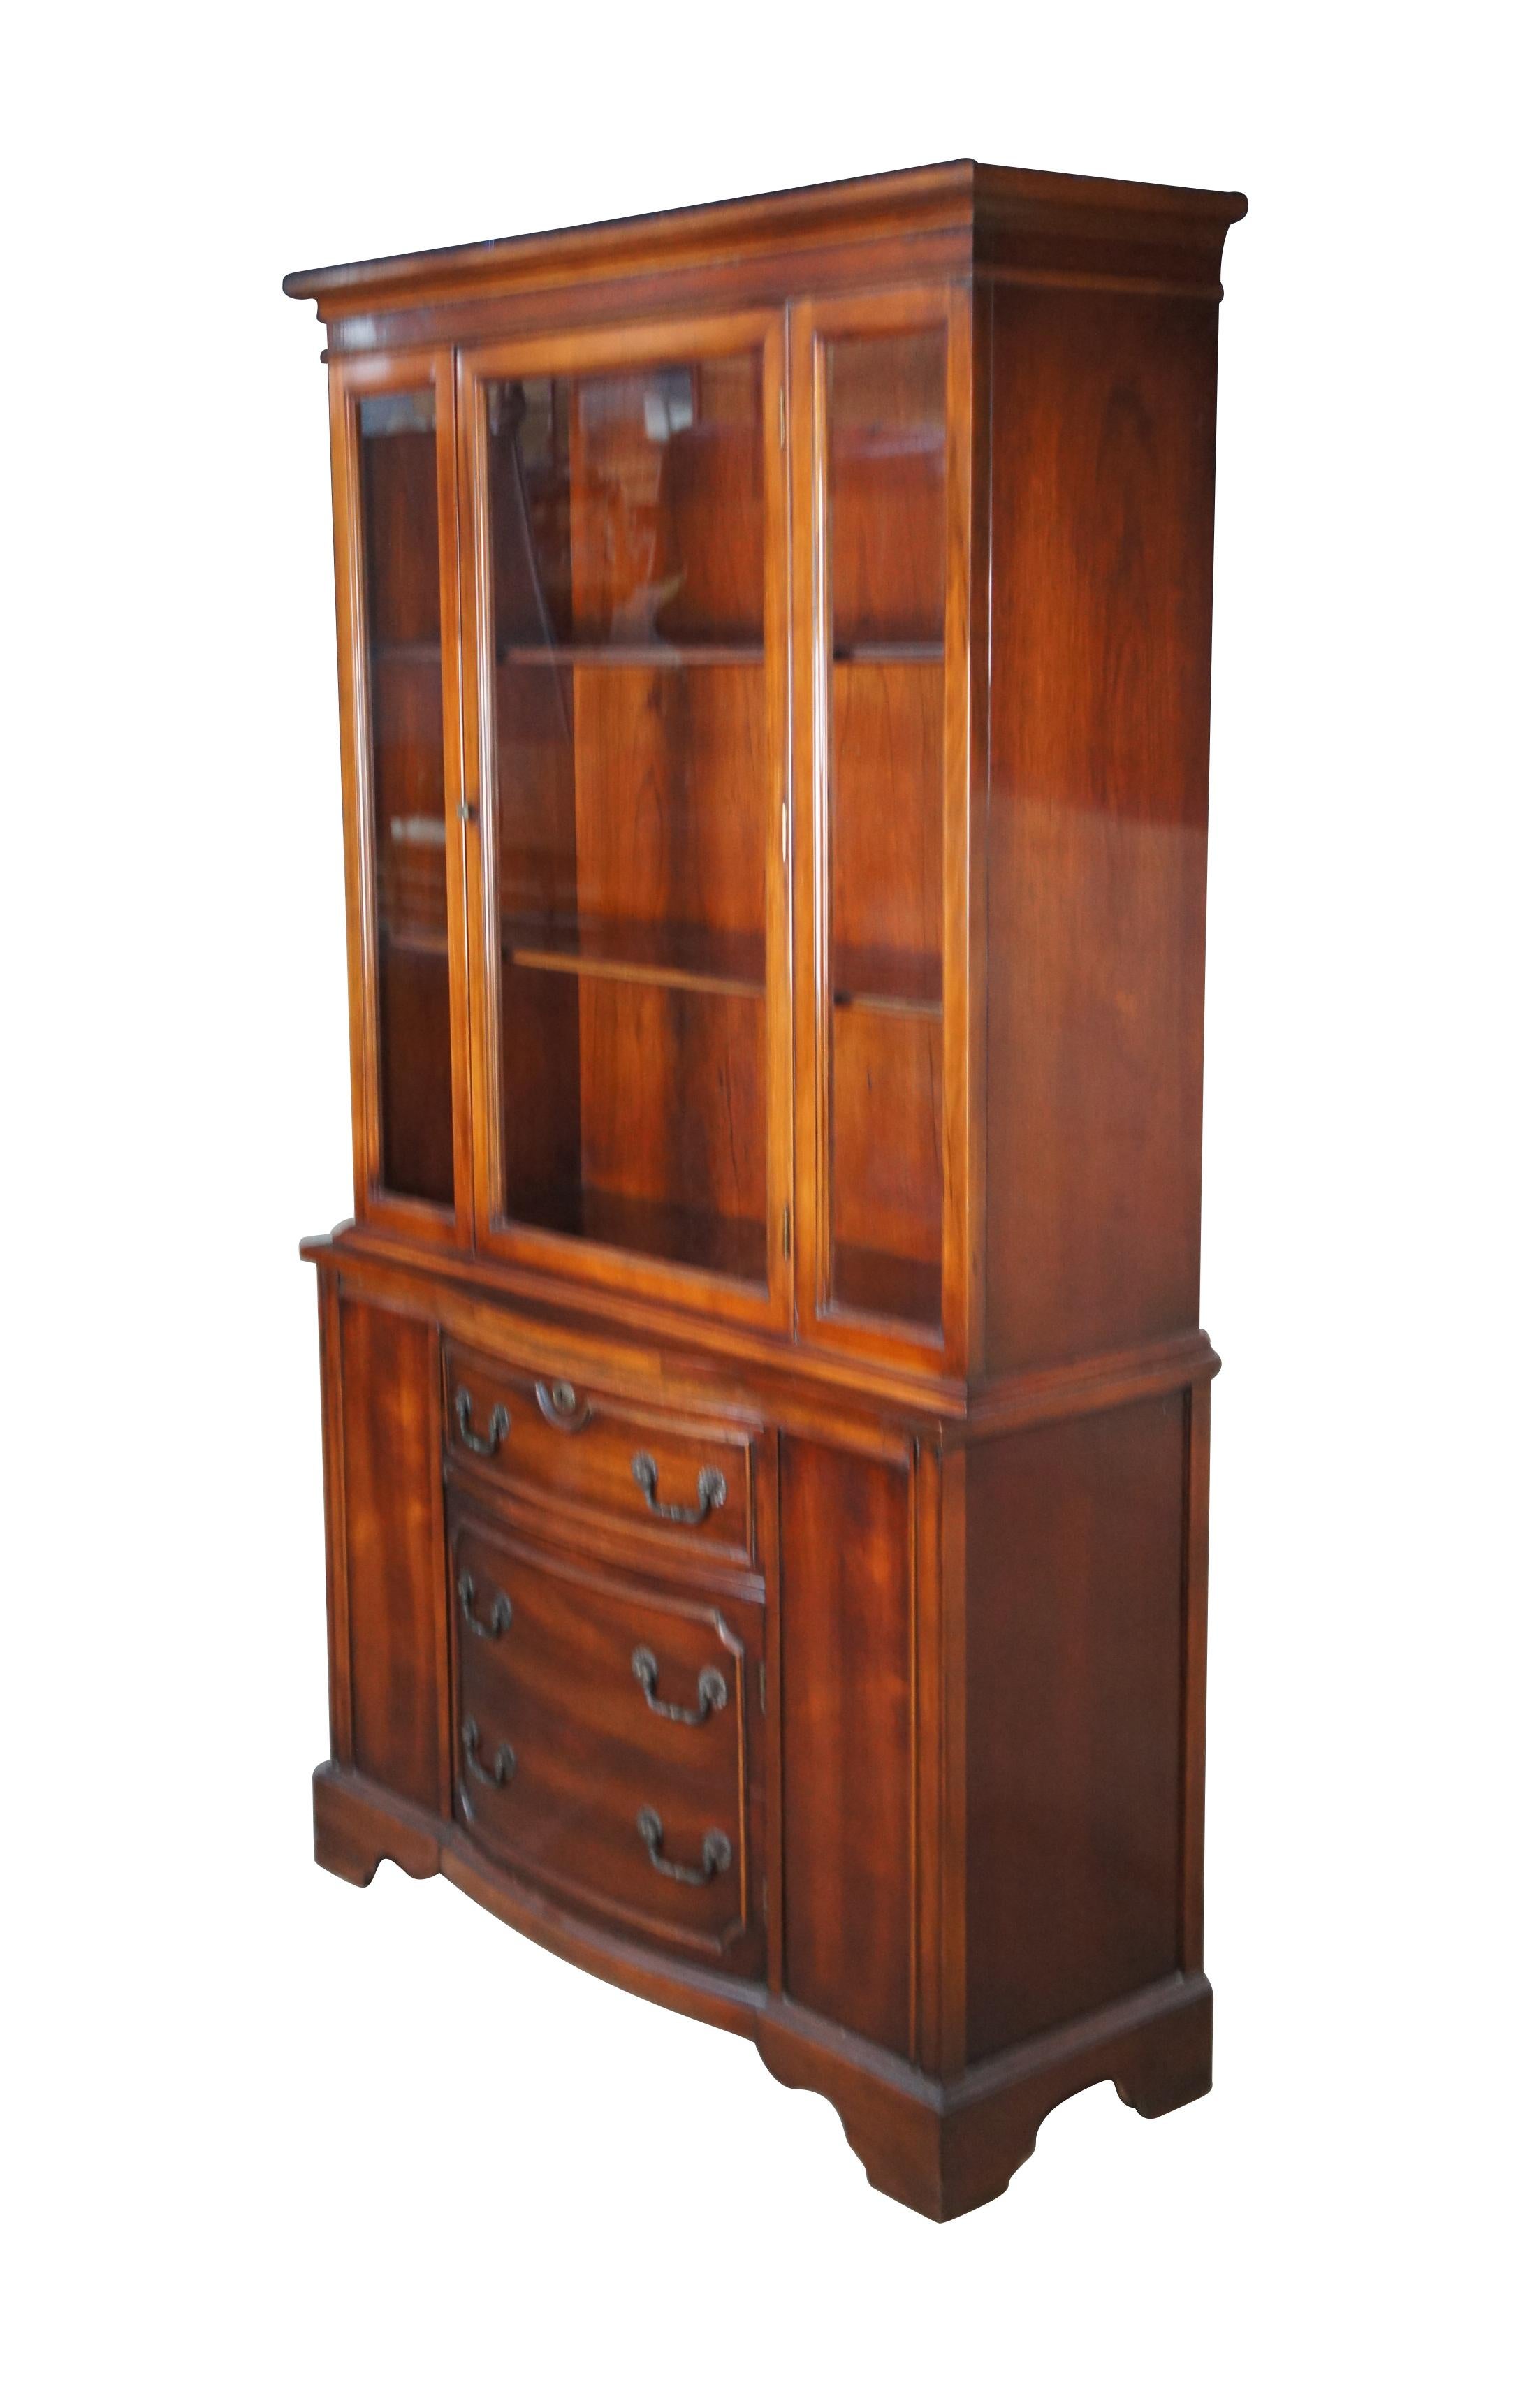 Mid century china cabinet or cupboard.  Made of mahogany featuring upper curio cabinet with three plate groove shelves and lower cabinet and drawer over bracket feet.

Dimensions:
16